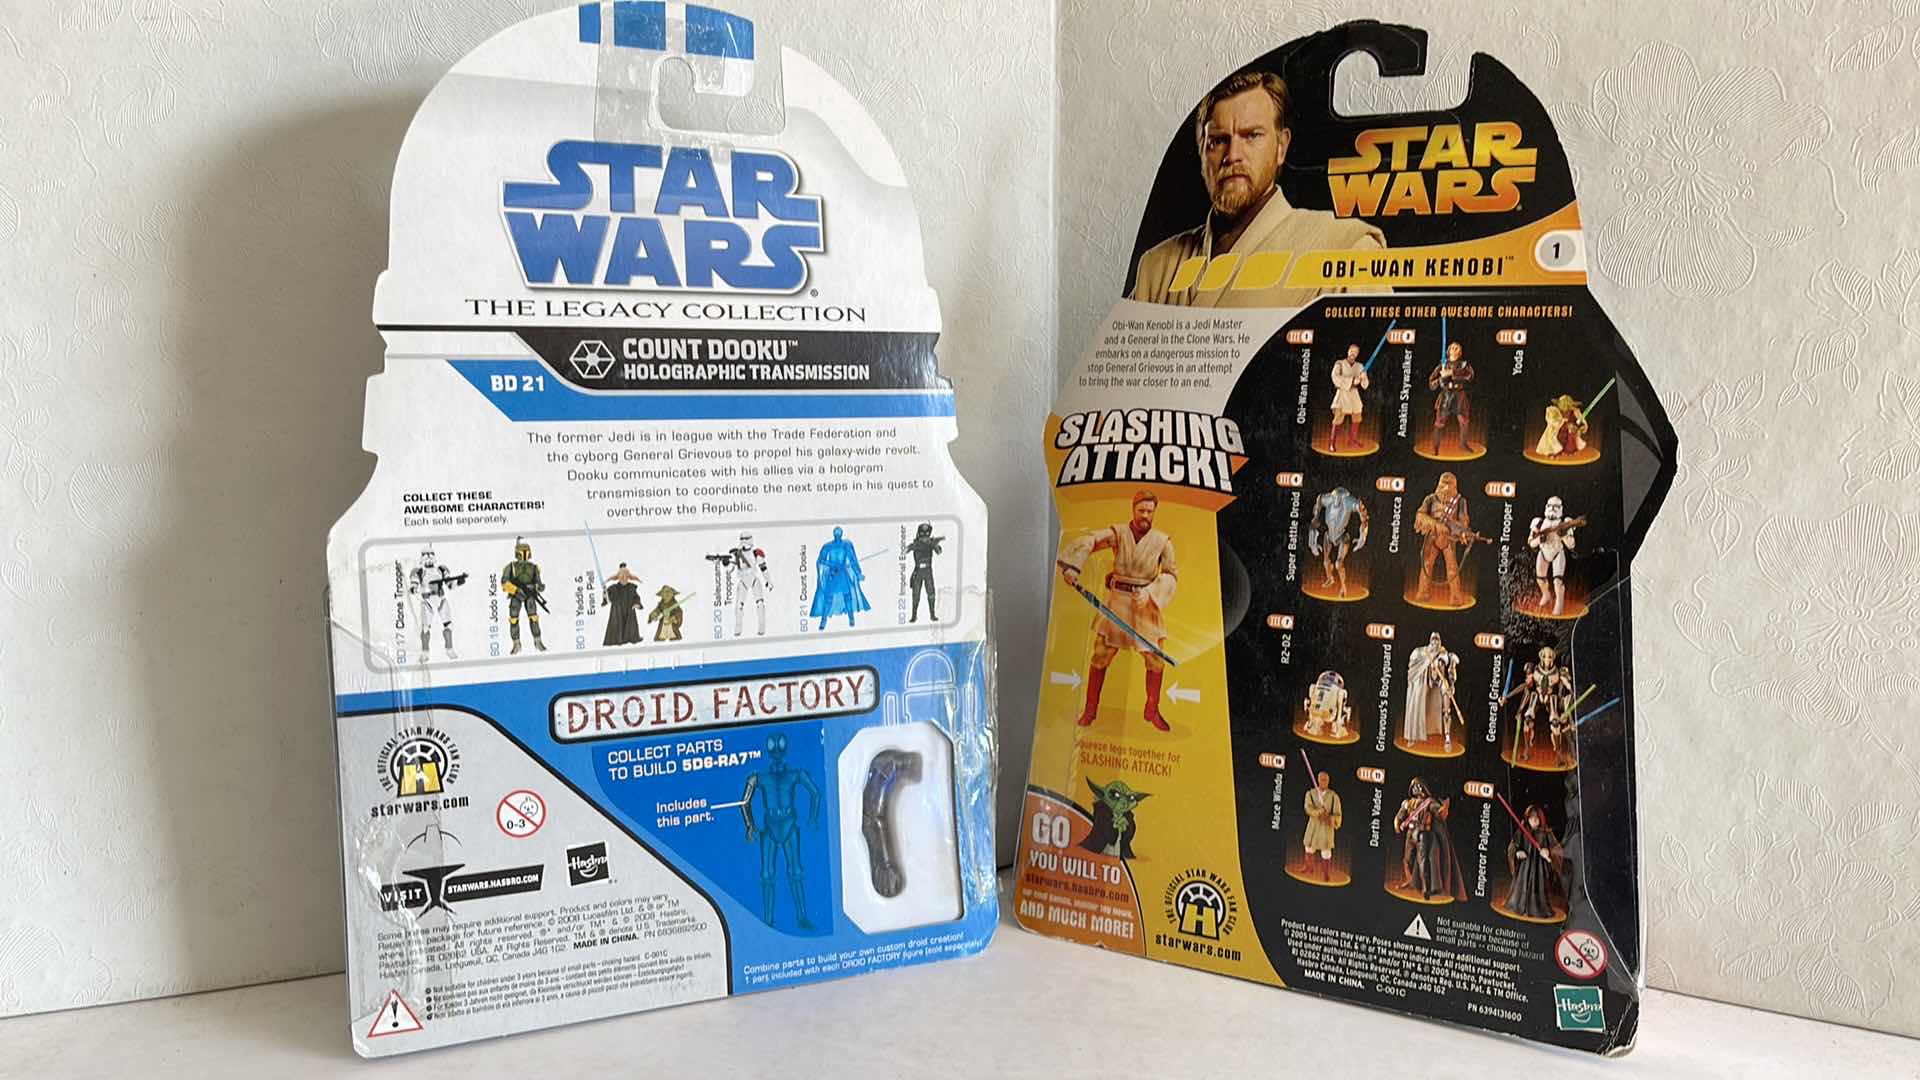 Photo 2 of STAR WARS THE LEGACY COLLECTION COUNT DOOKU & STAR WARS REVENGE OF THE SITH OBI-WAN KENOBI MSRP $14.99 EACH